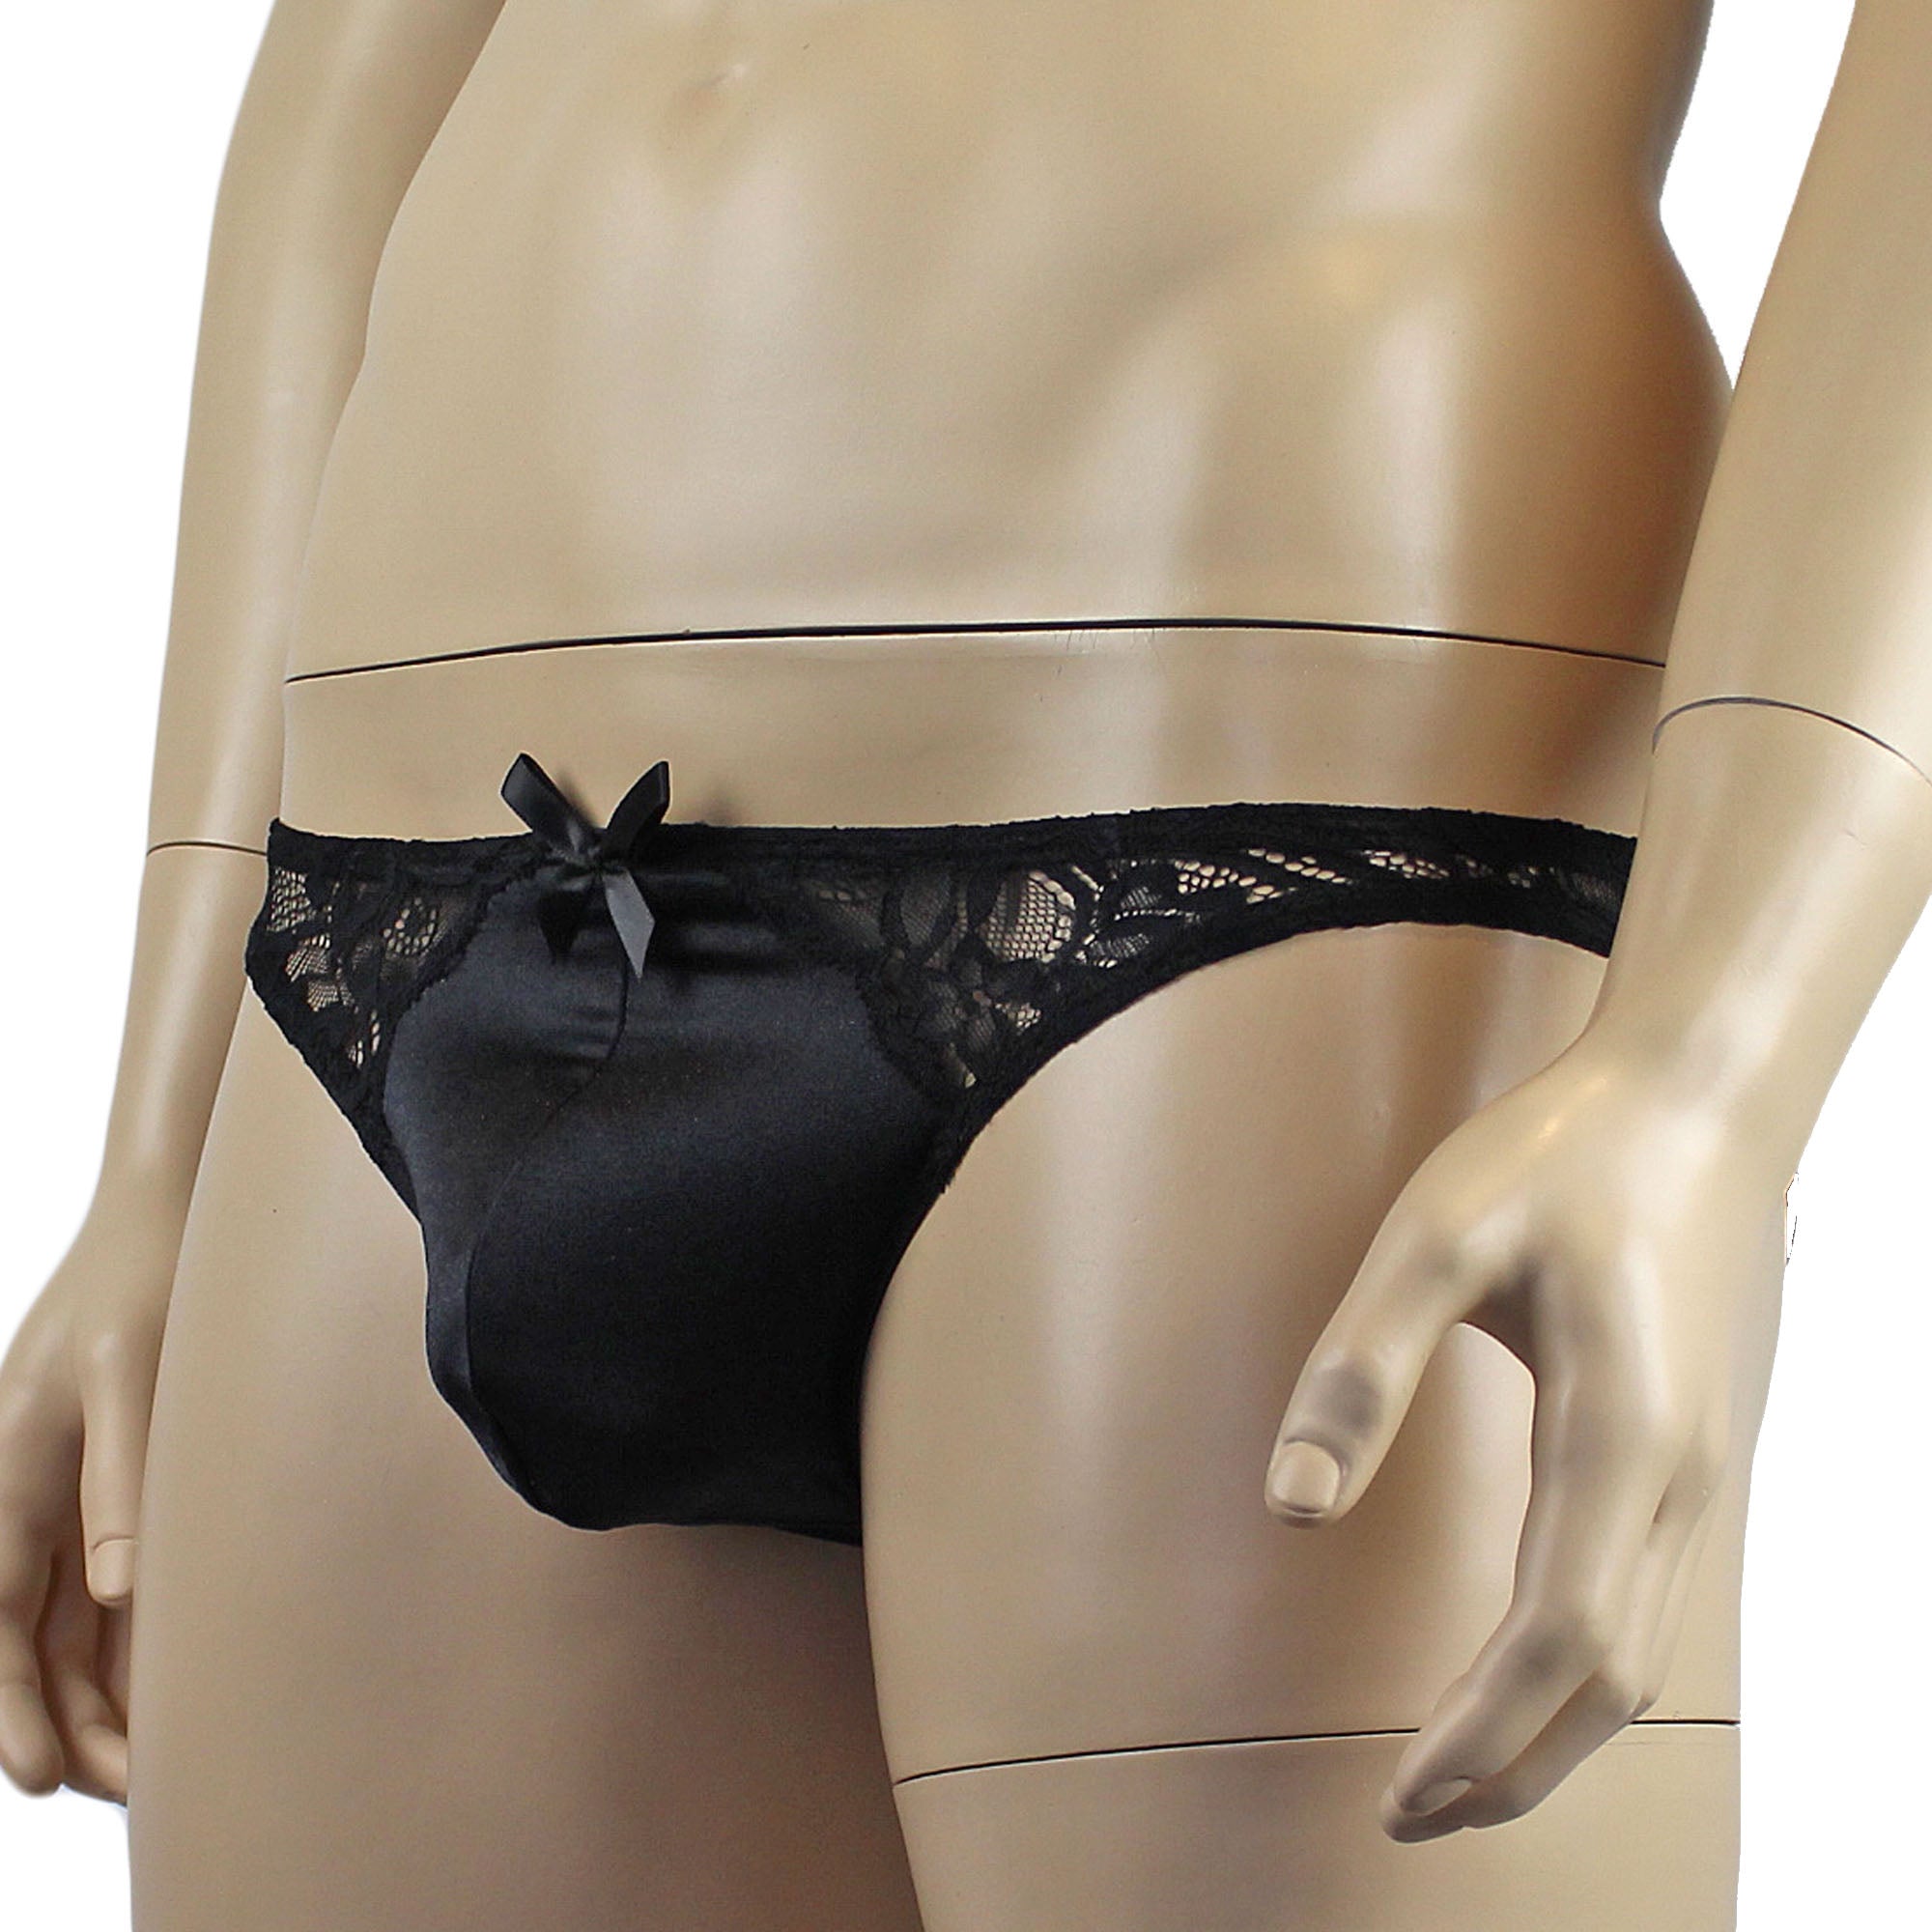 Mens Risque G string Thong Black and Black Lace